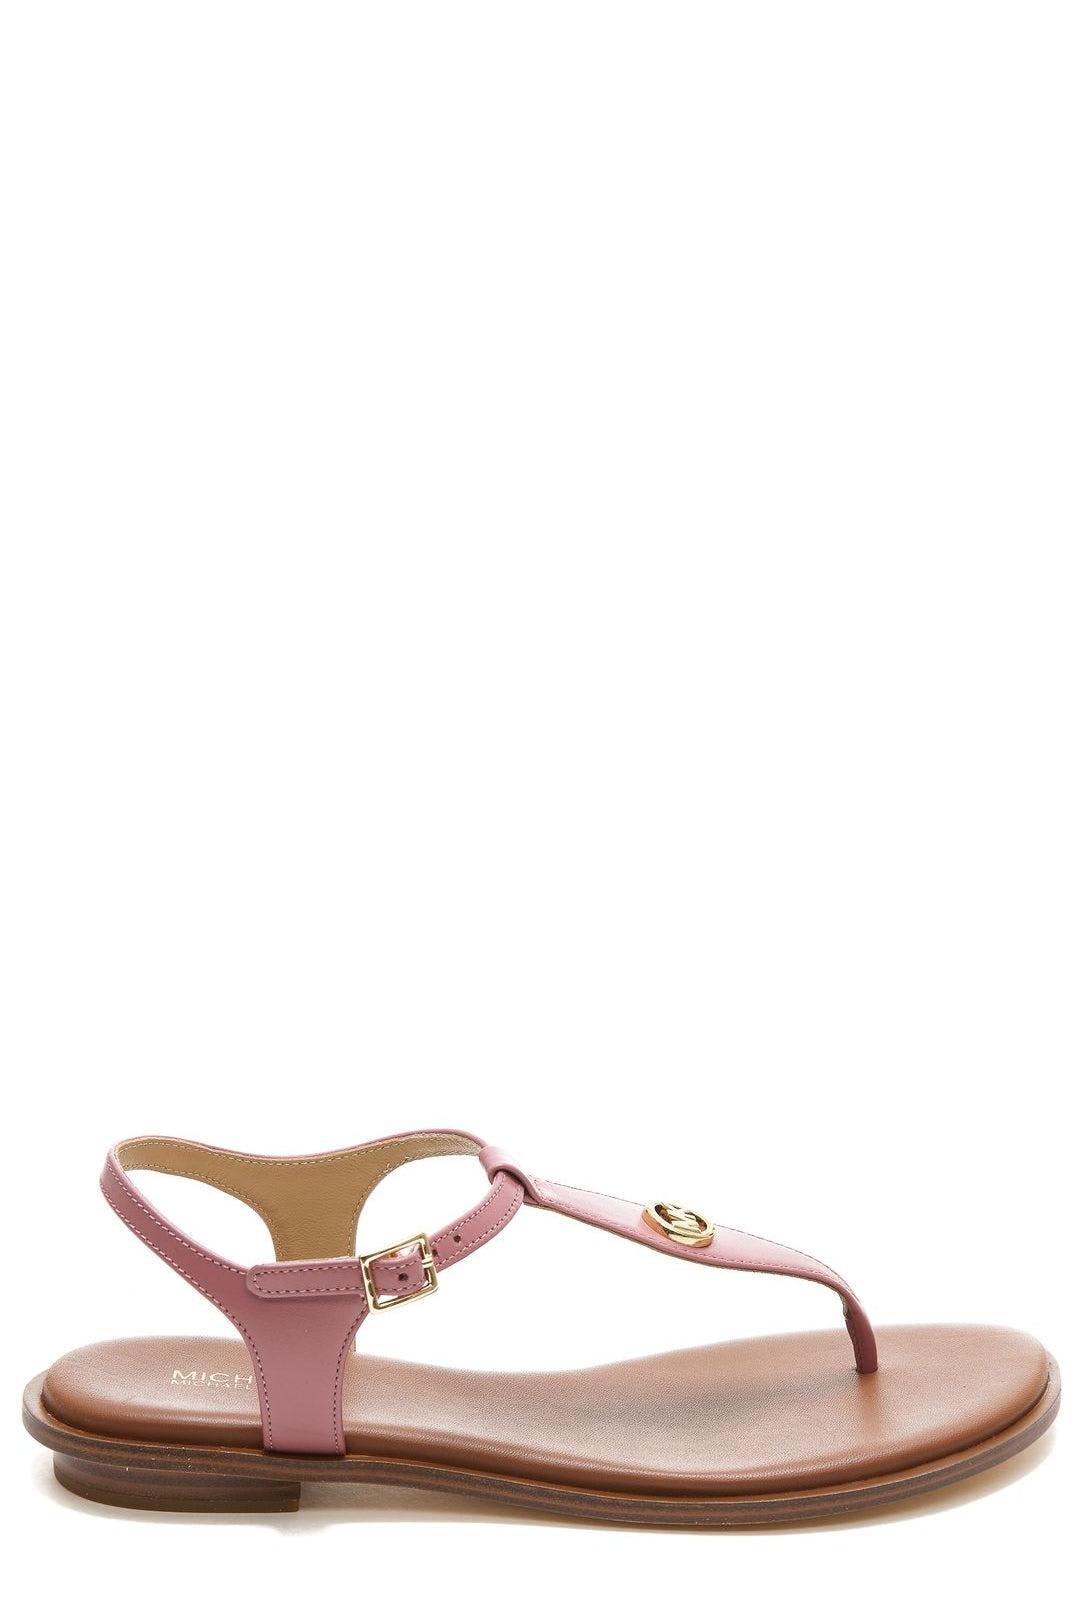 MICHAEL Michael Kors Mallory T-strap Sandals in Pink | Lyst